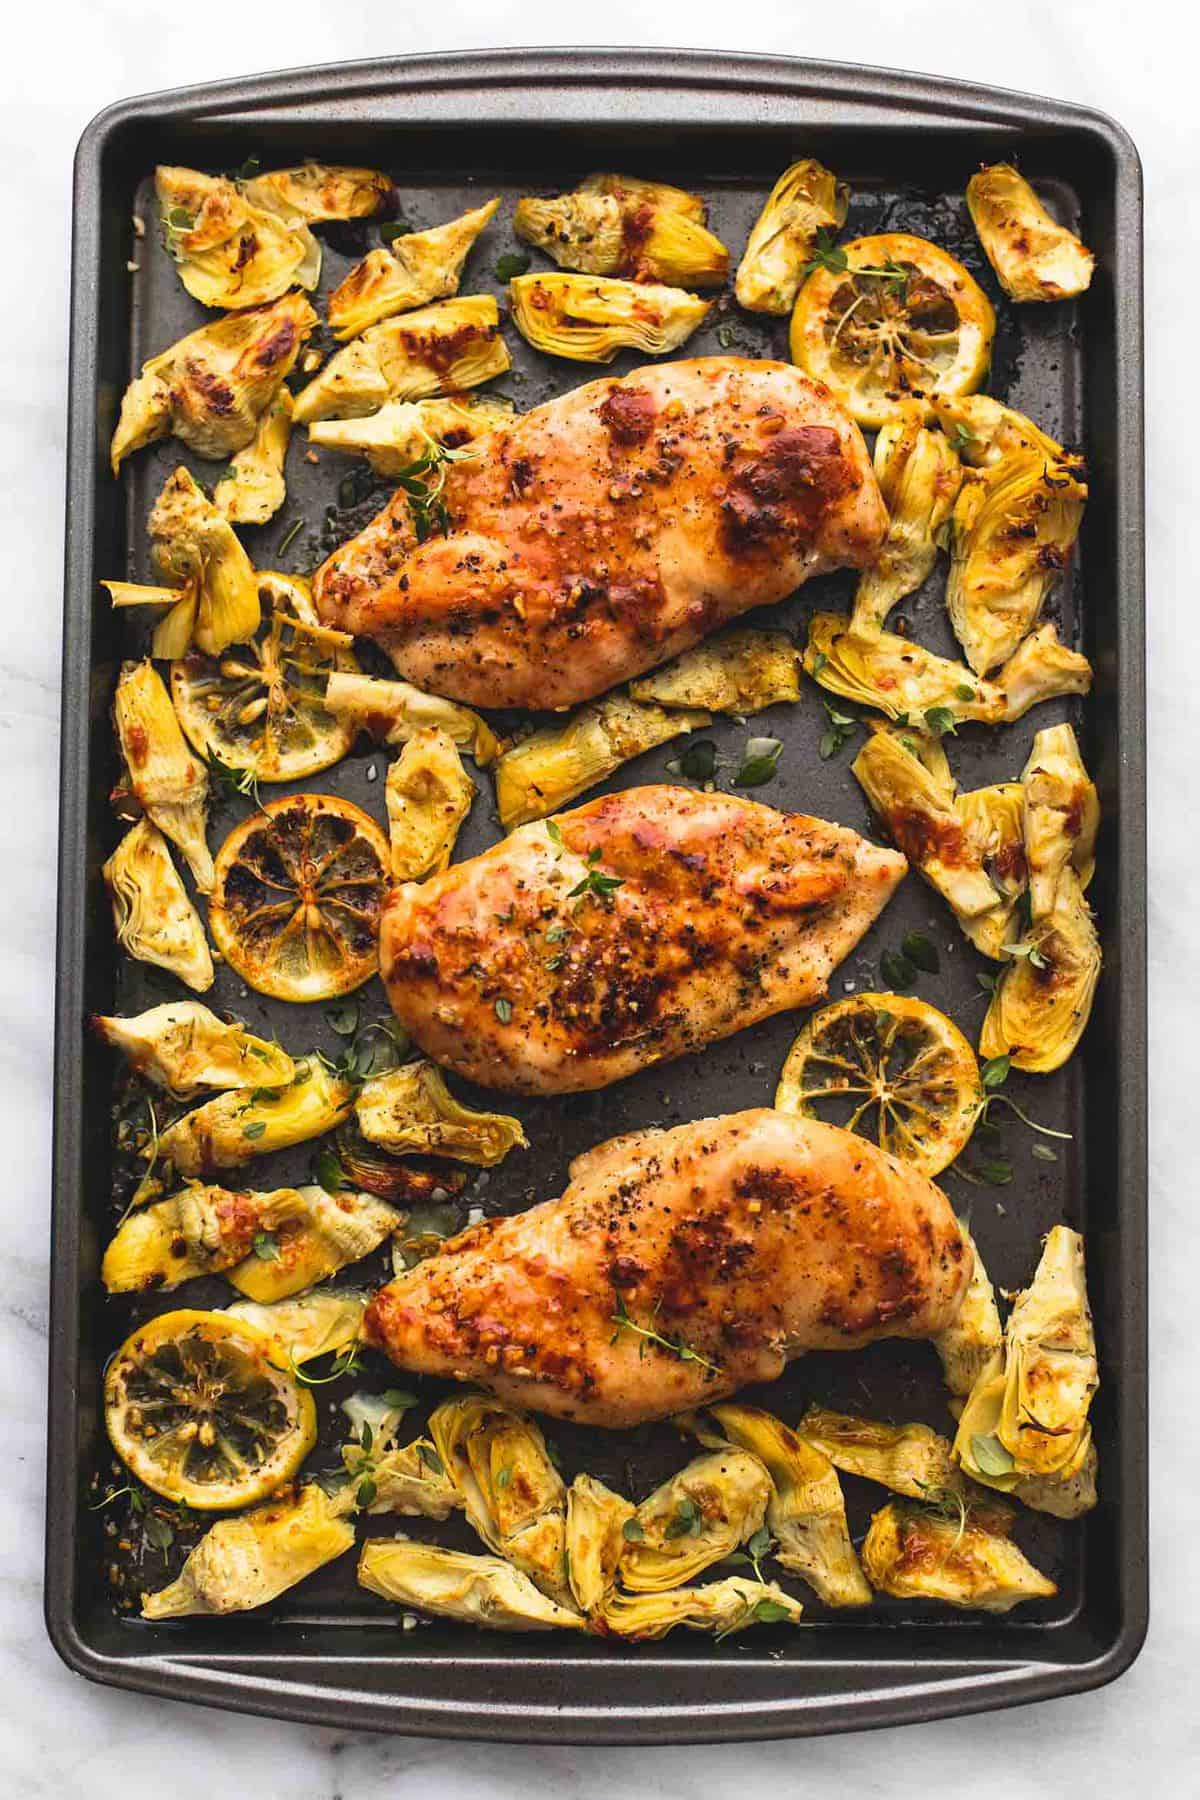 top view of baked lemon chicken and artichokes in a baking sheet.